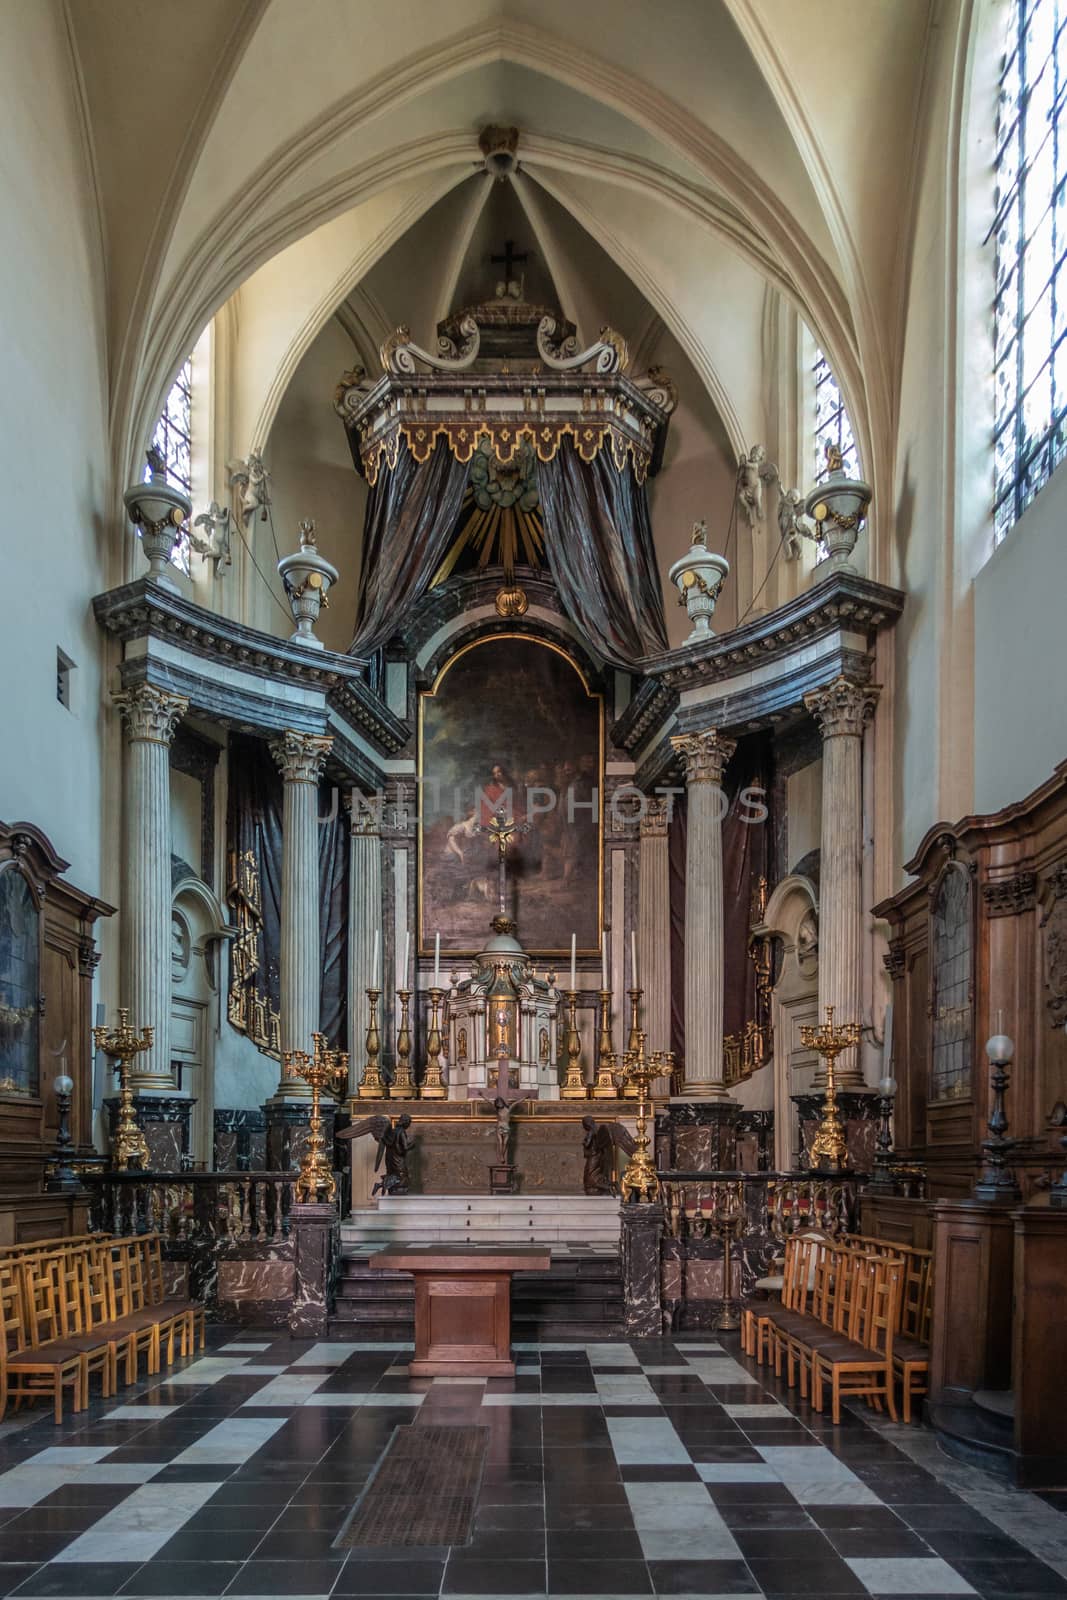 Brussels, Belgium - September 26, 2018: Inside Saint Nicolas Church. High altar with tabernacle, Jesus painting, candles, wooden sculptures, golden decorations.